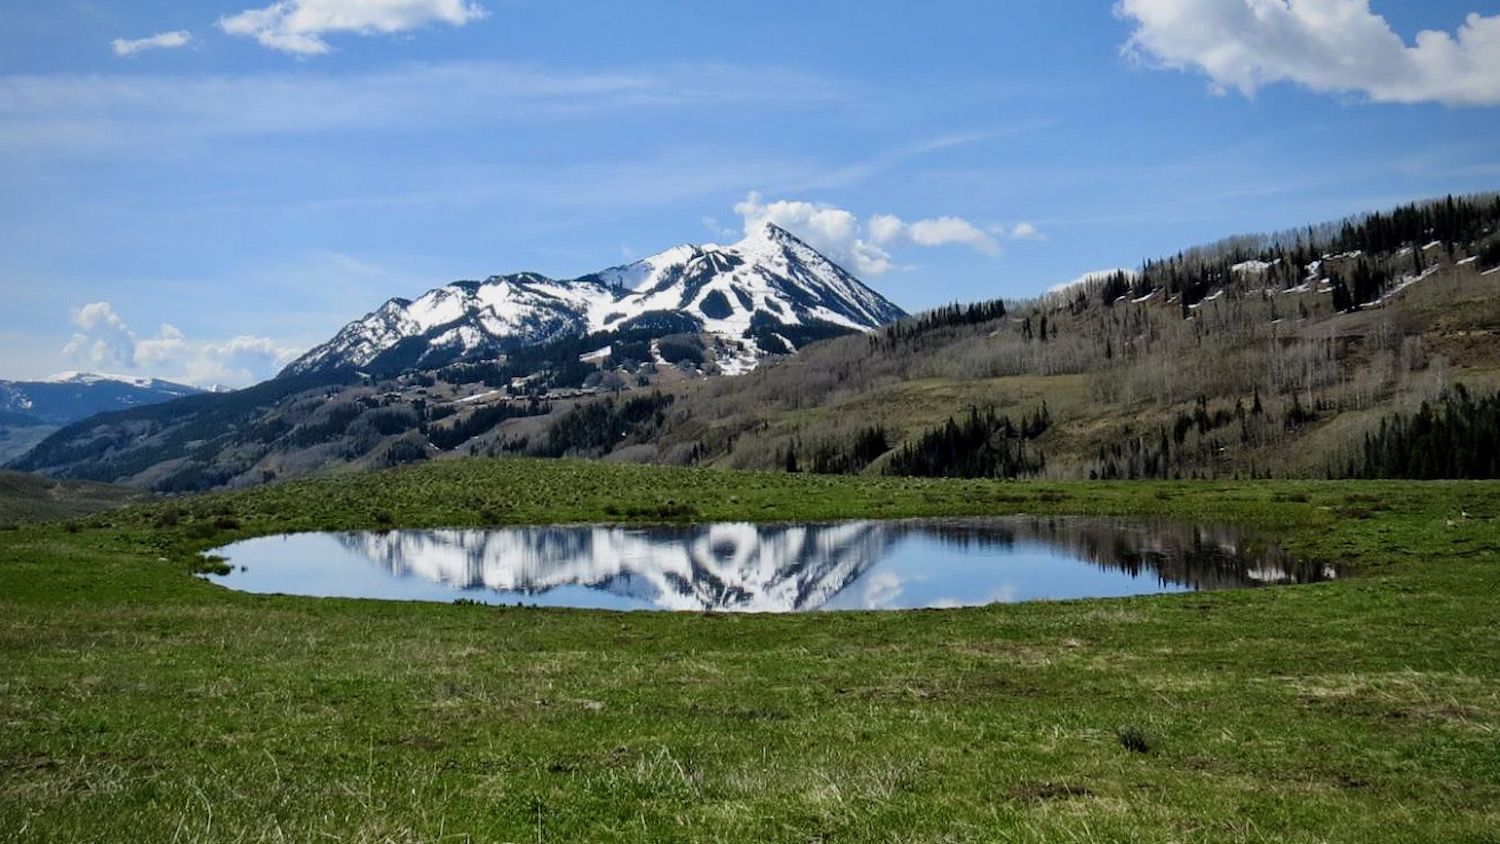 alpine pond with a mountain in its reflection by Susan Washko